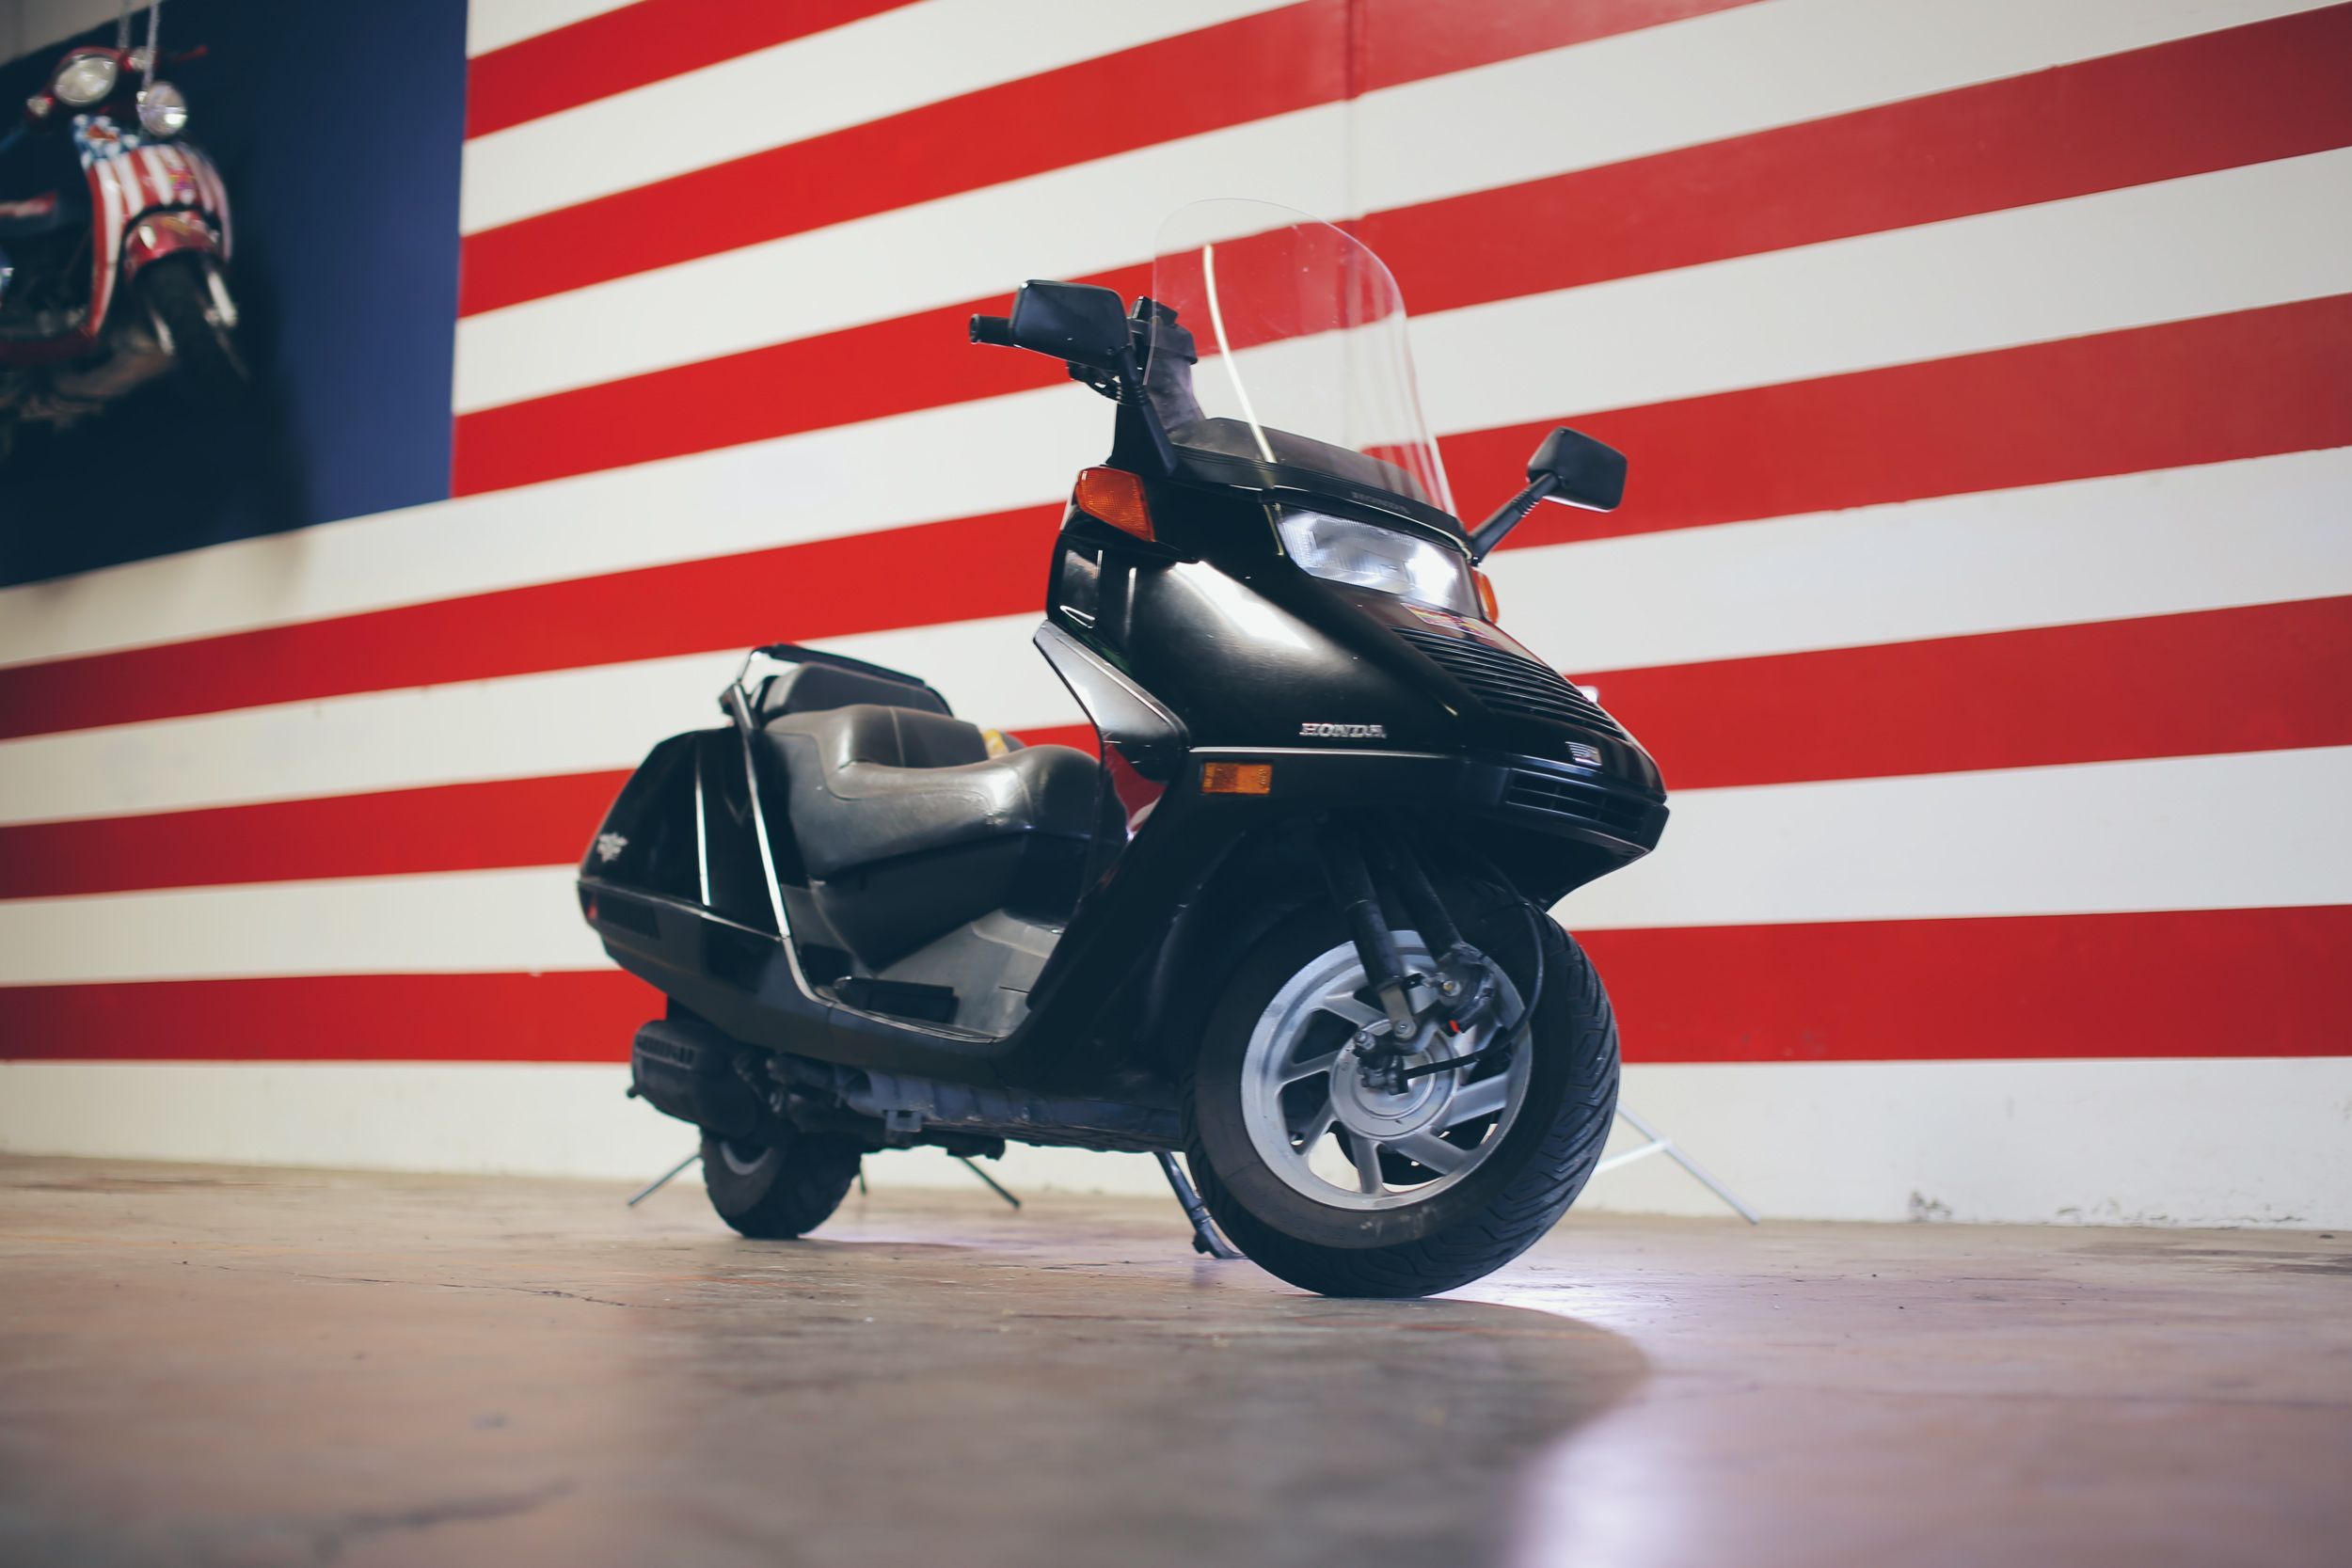 Should the Honda Helix run for office?